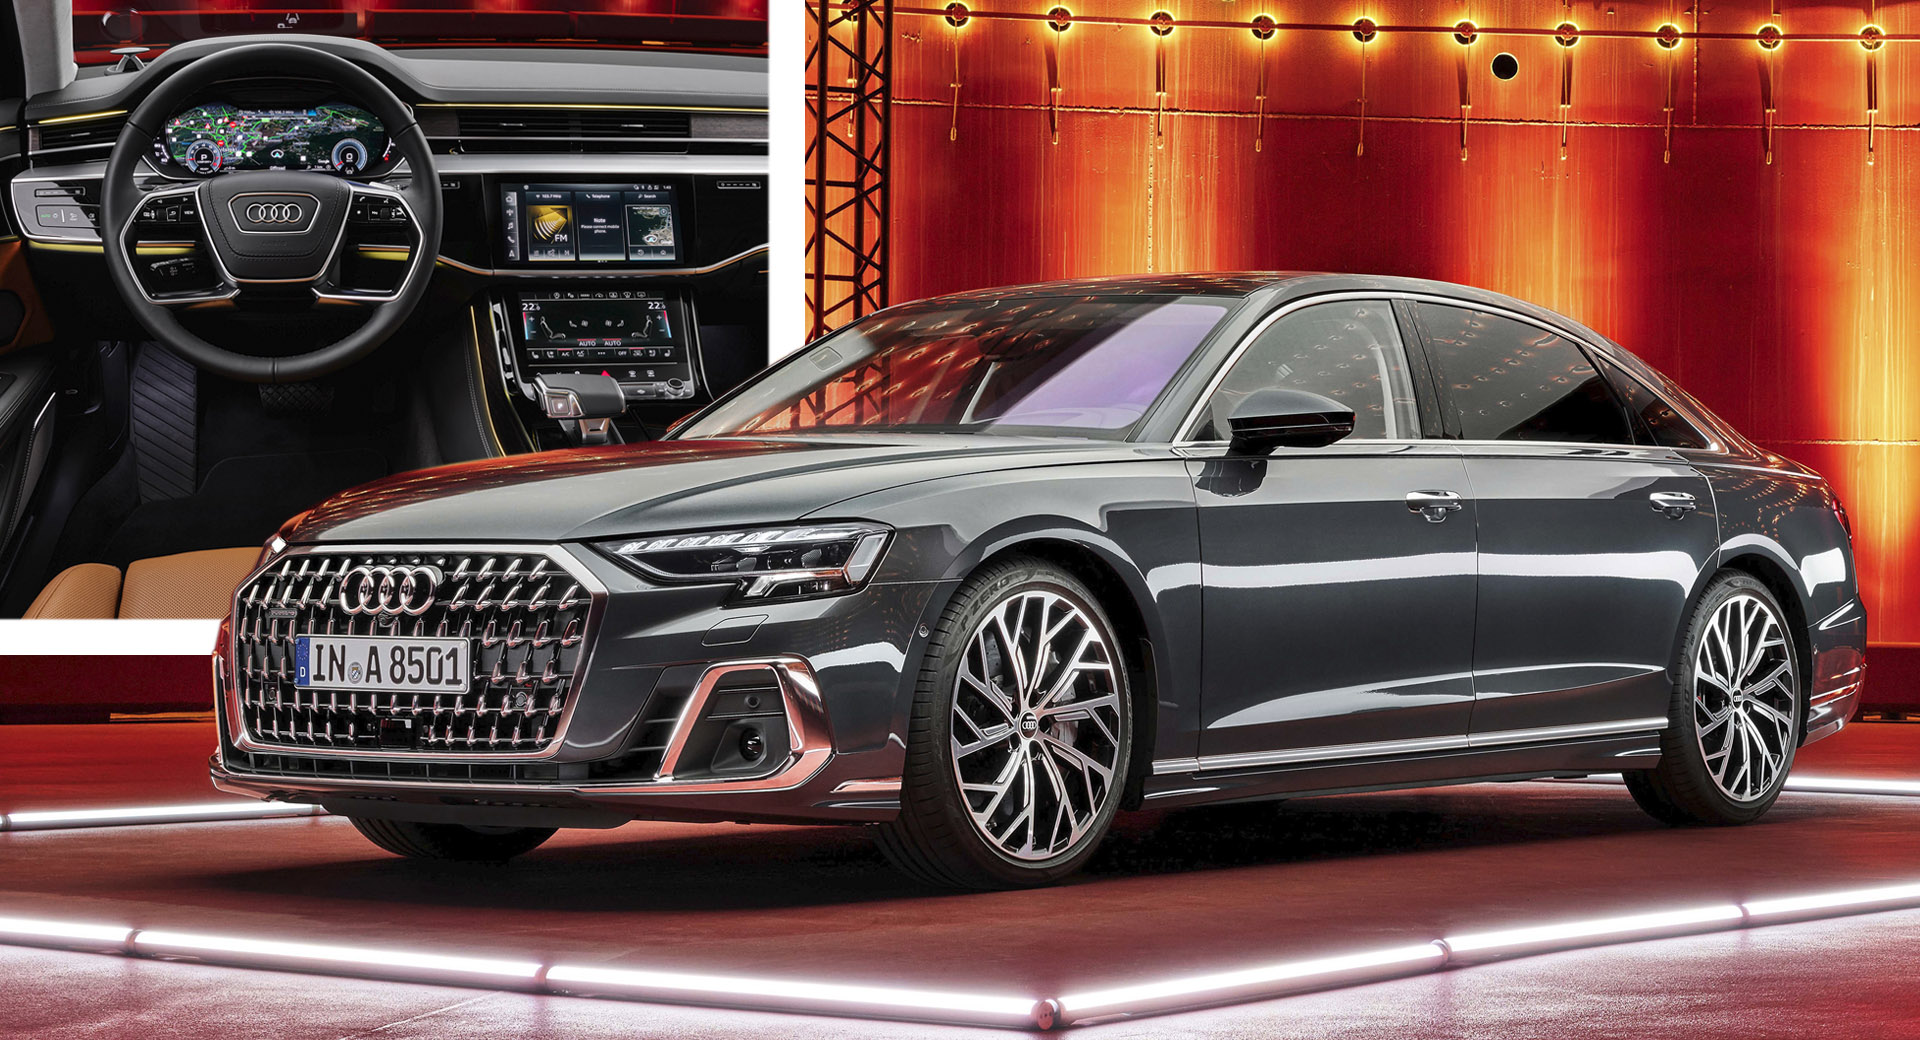 2022 Audi A8 Facelift Unveiled With Visual Updates, New Trims And More Tech